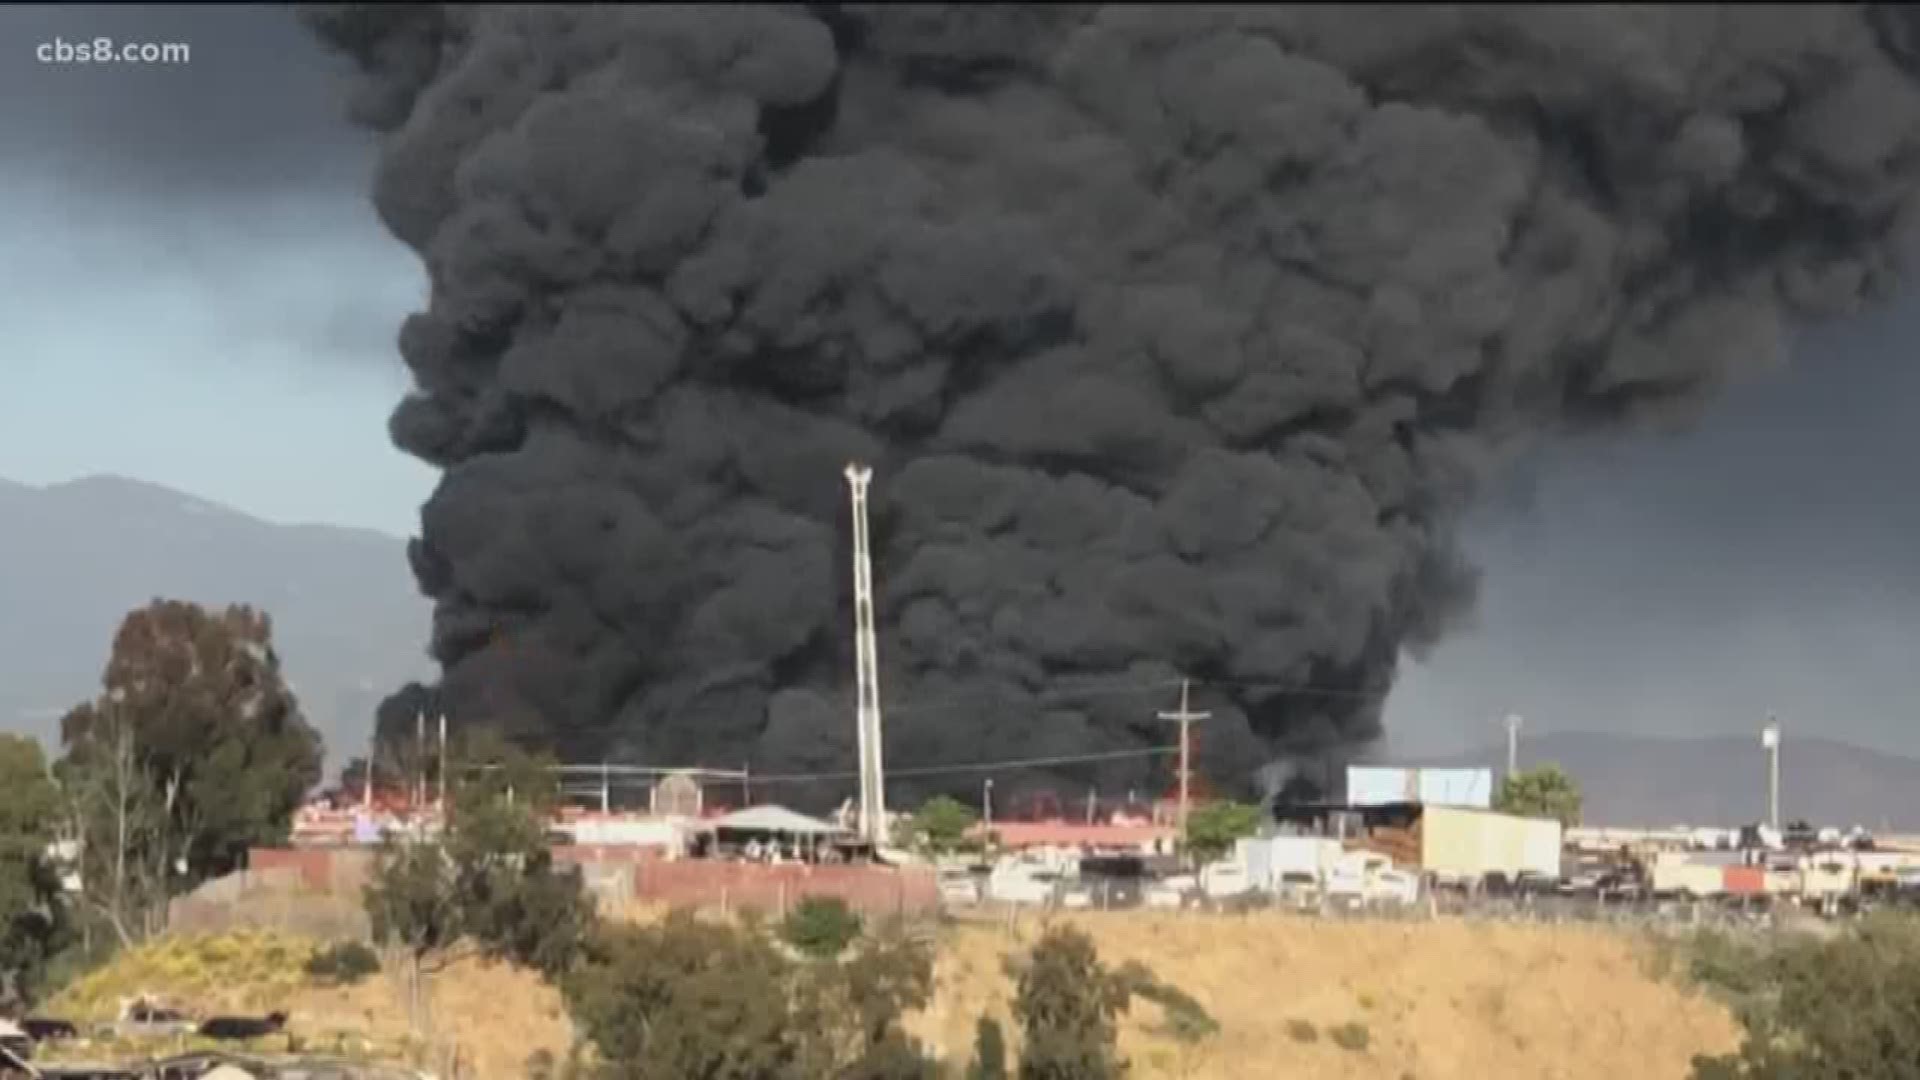 Fire crews faced challenges as fire ripped through Otay Mesa auto yard.